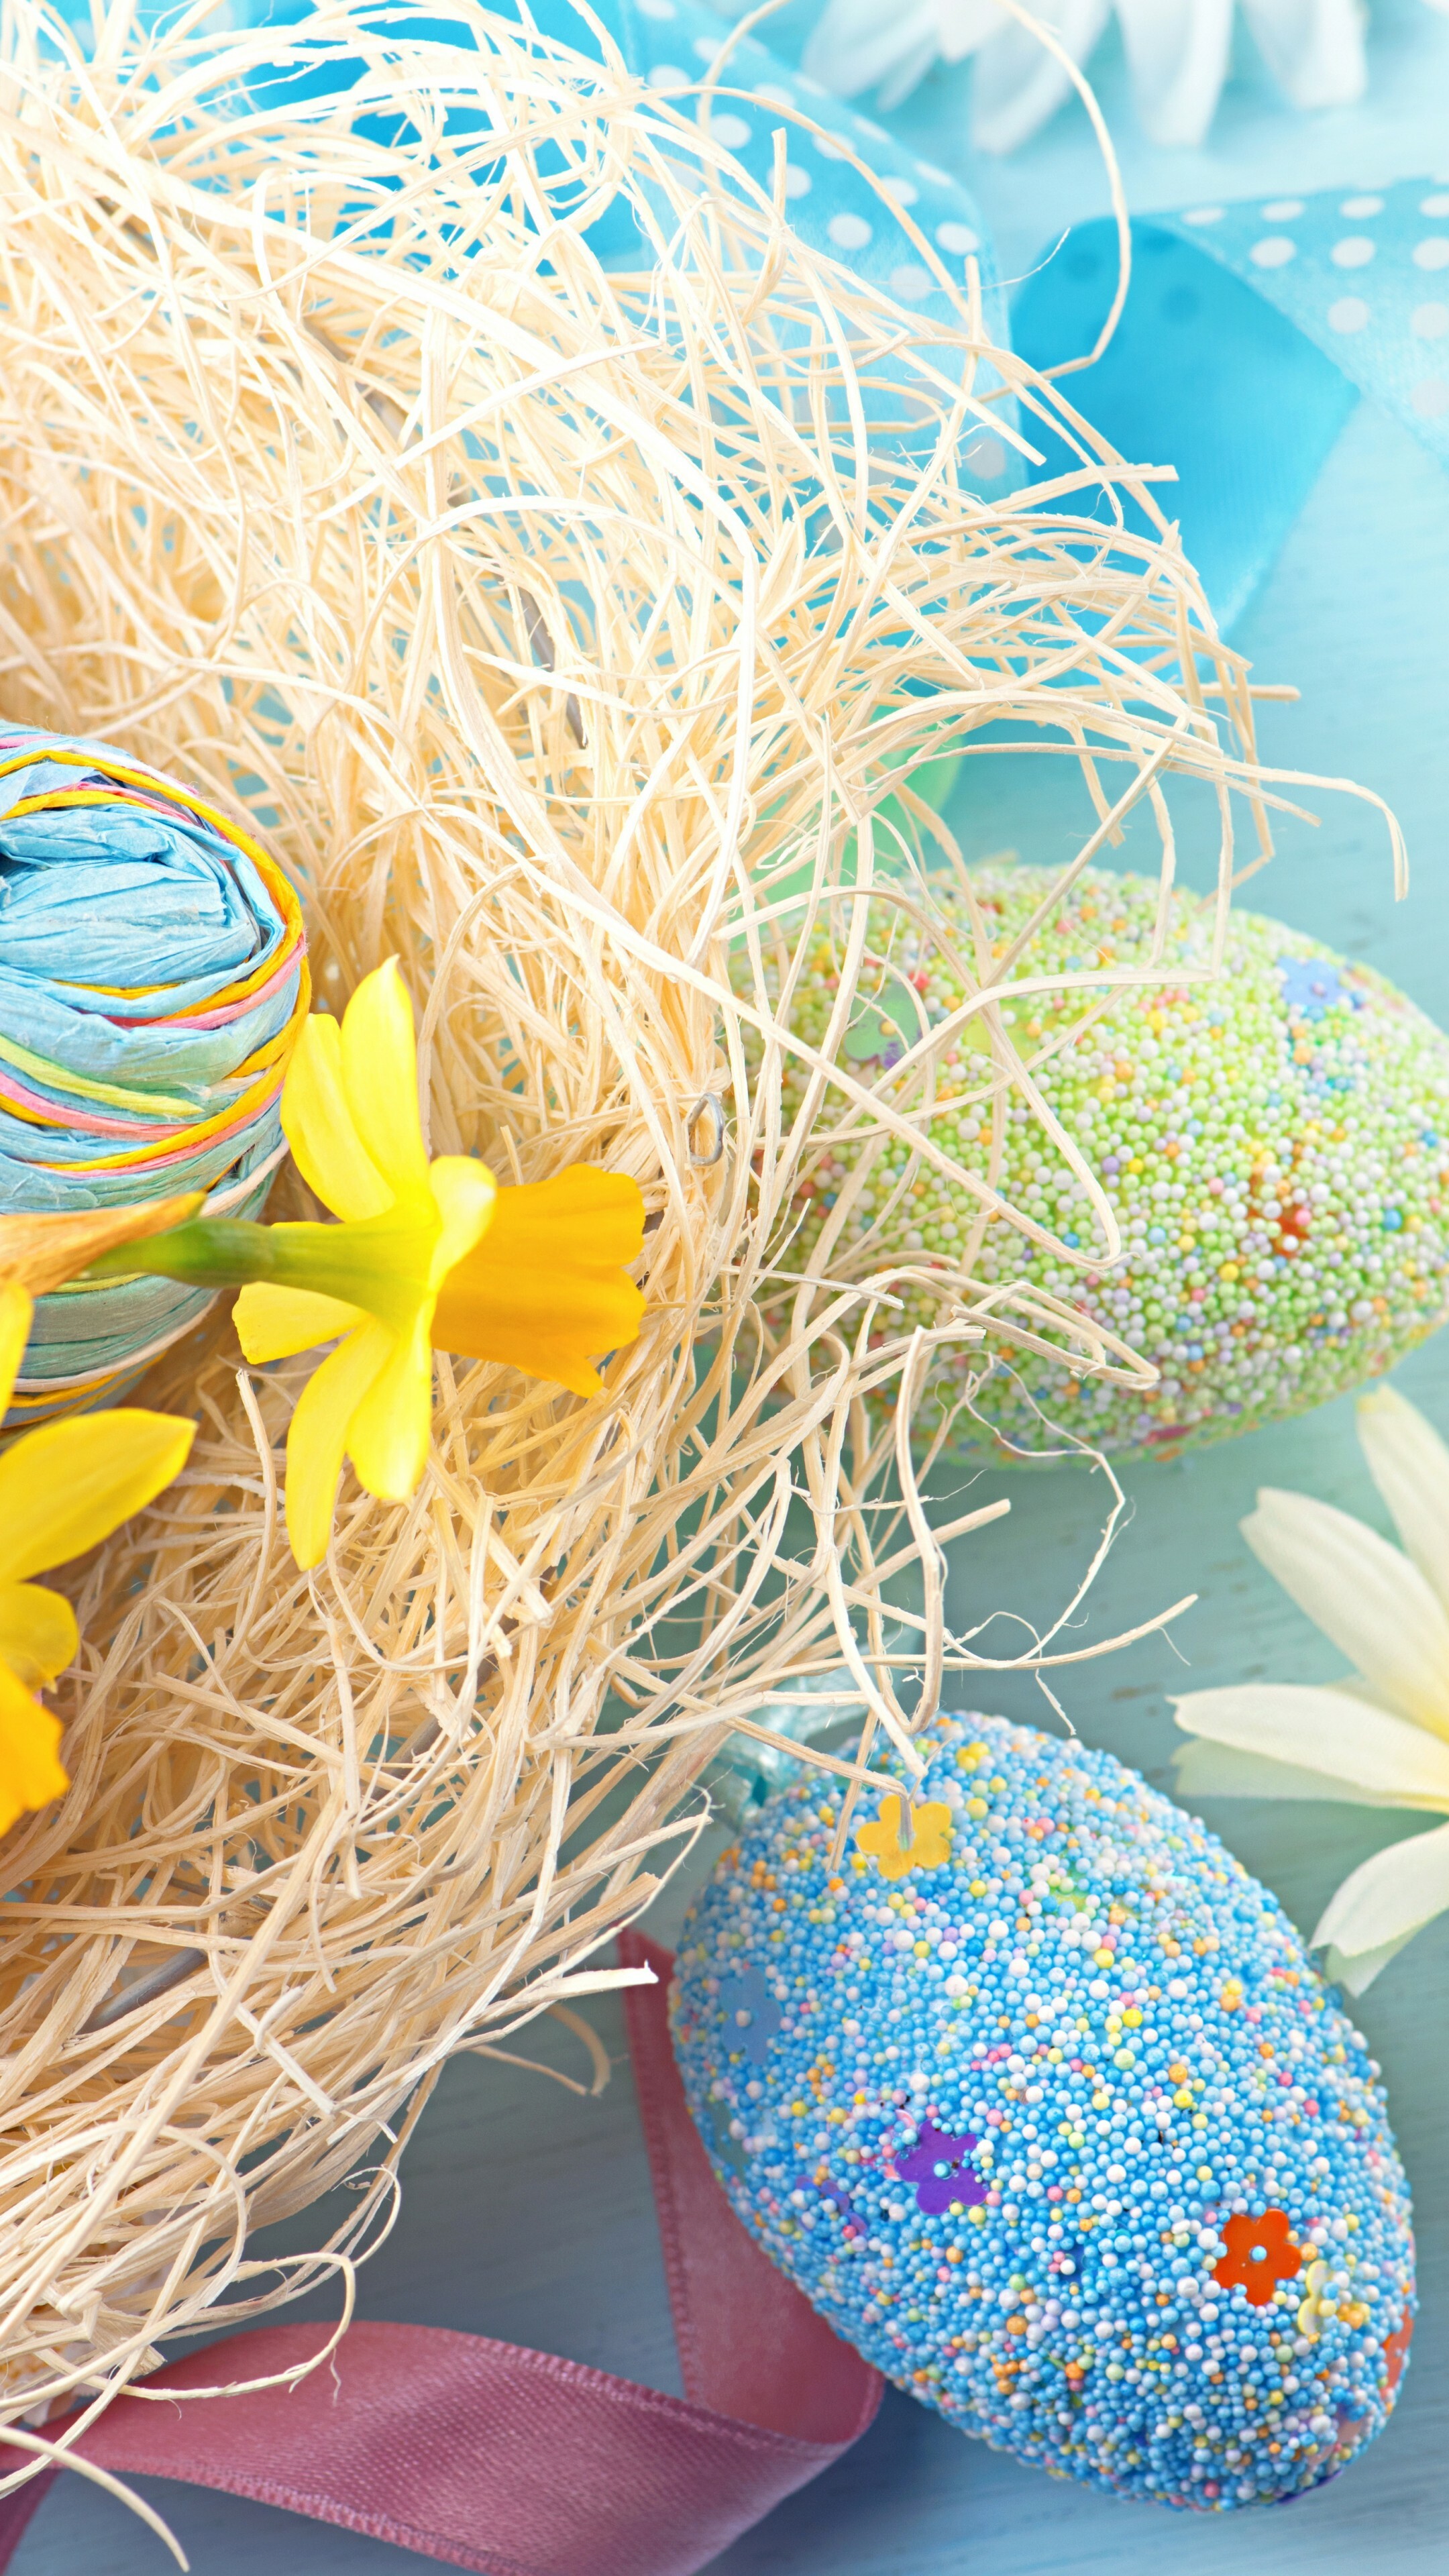 Easter: Eggs, Holidays, The first Sunday after the ecclesiastical full moon. 2160x3840 4K Background.